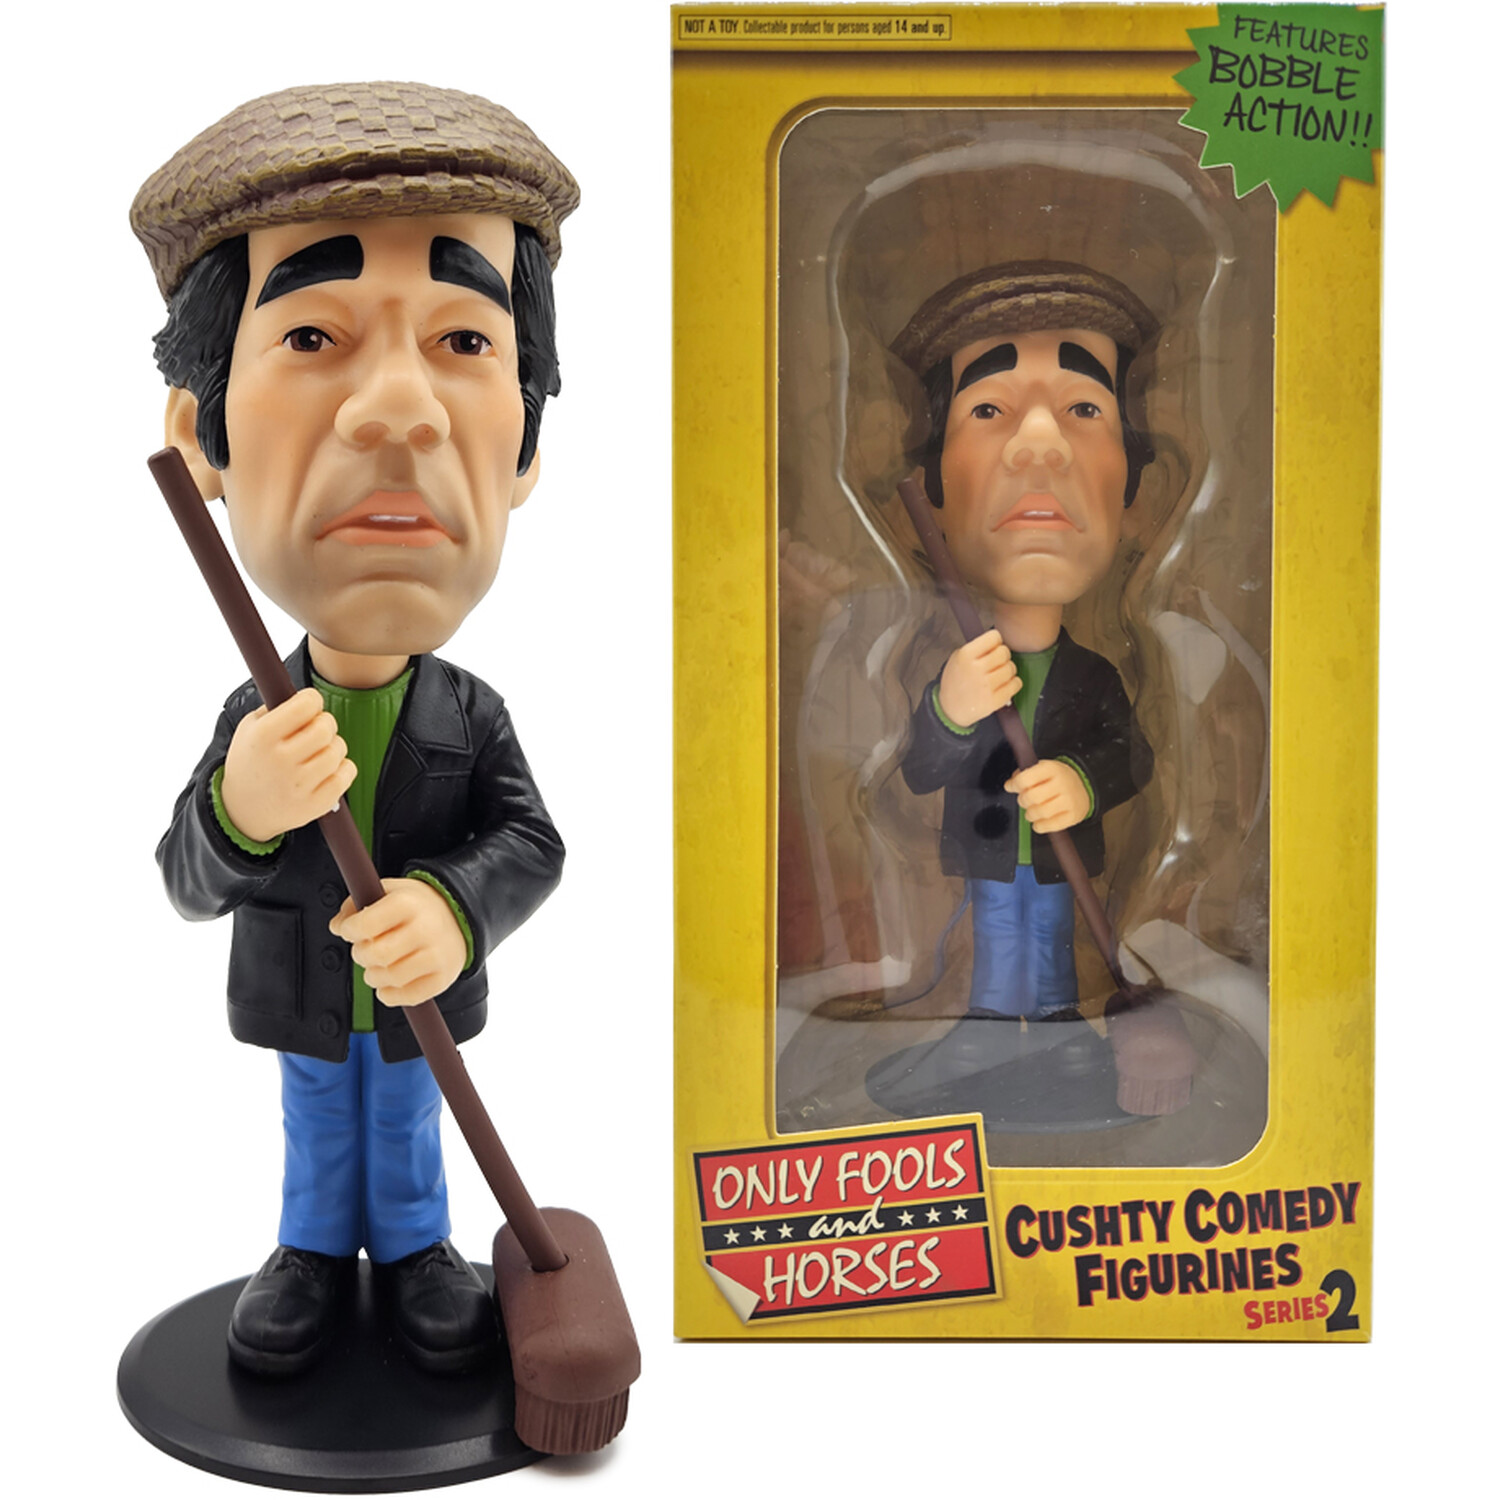 Only Fools and Horses Cushty Comedy Figurine Assorted Image 4